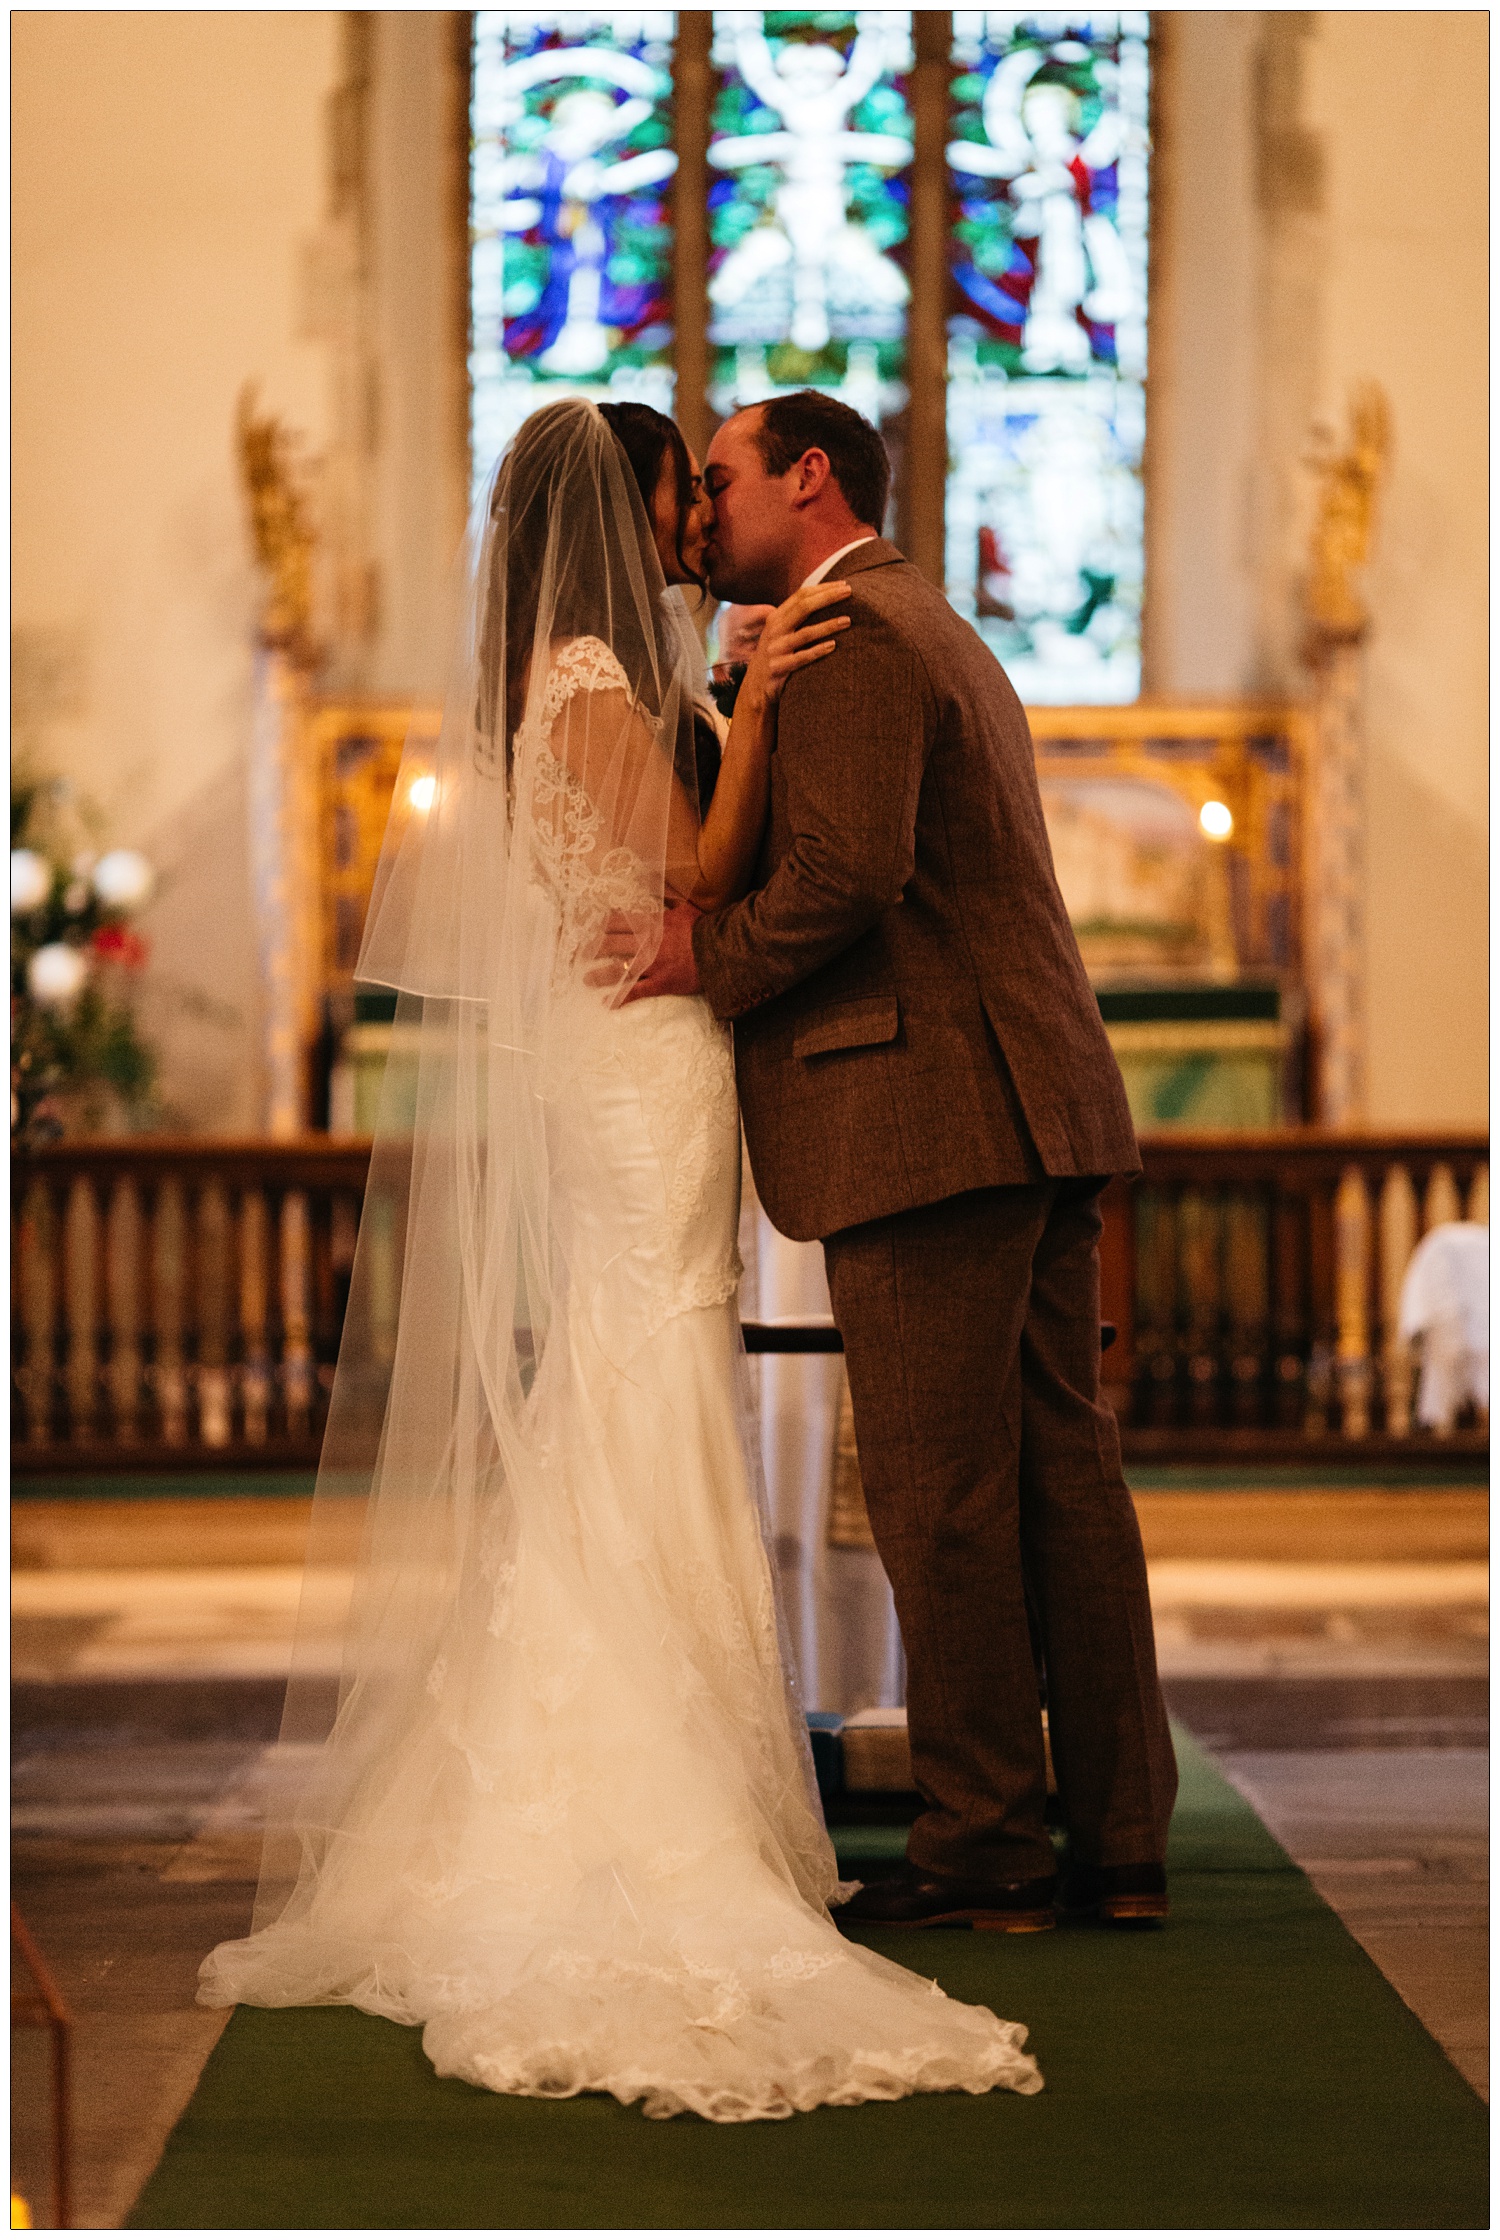 A couple kiss in a winter wedding ceremony at All Saints Church in Purleigh.